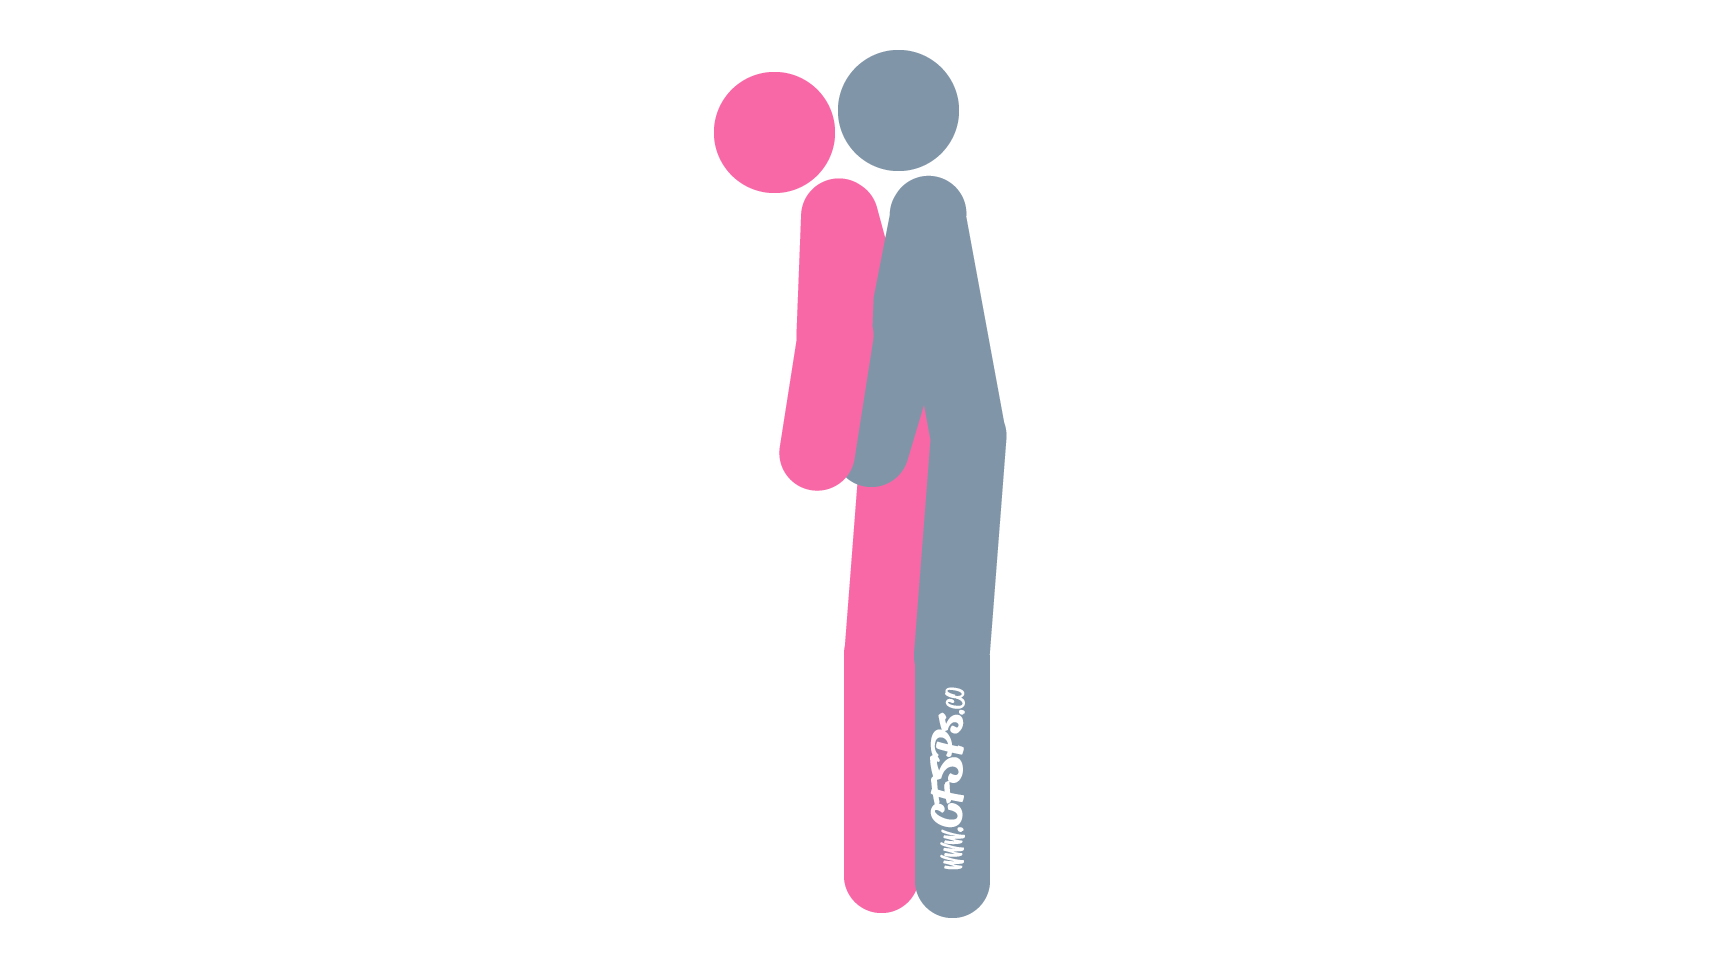 This stick figure image depicts a man and woman having sex in the Column sex position. The woman is standing. The man is standing behind her with his body pressed against hers and arms around her pelvis, stimulating her clitoris with his fingers.